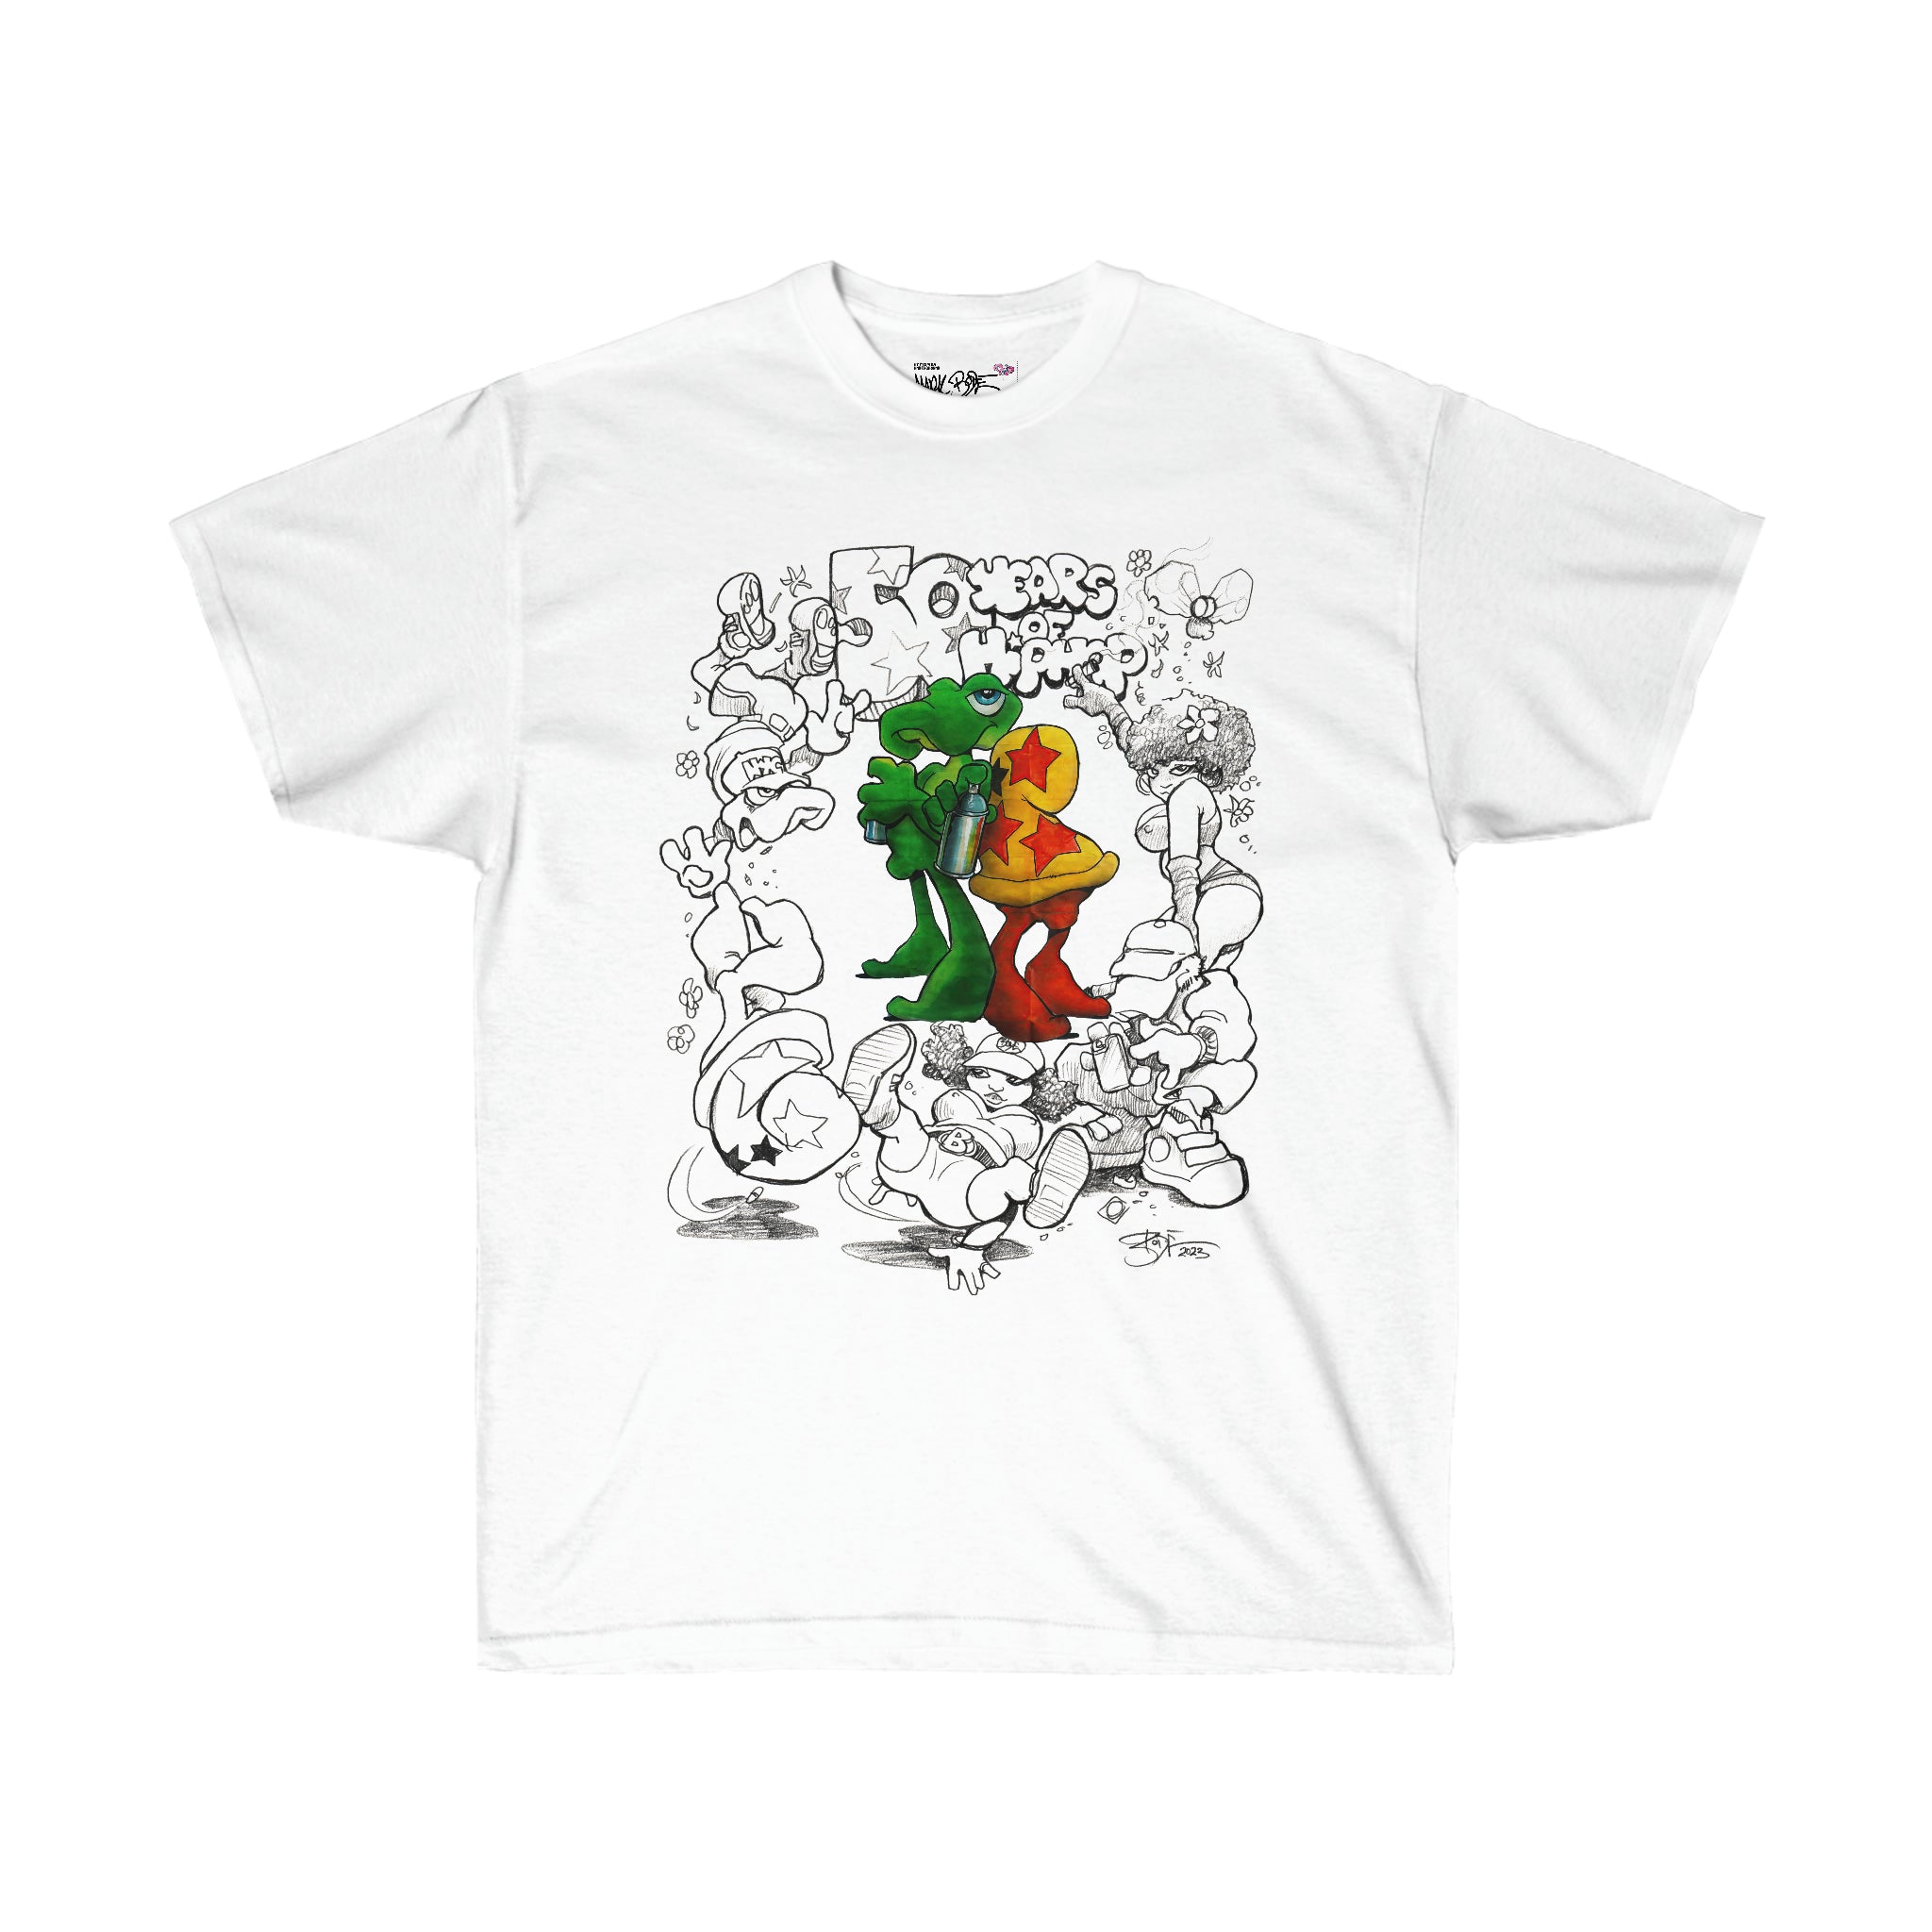 Bode X 50th Anniversary of Hip Hop Limited Edition Tee White